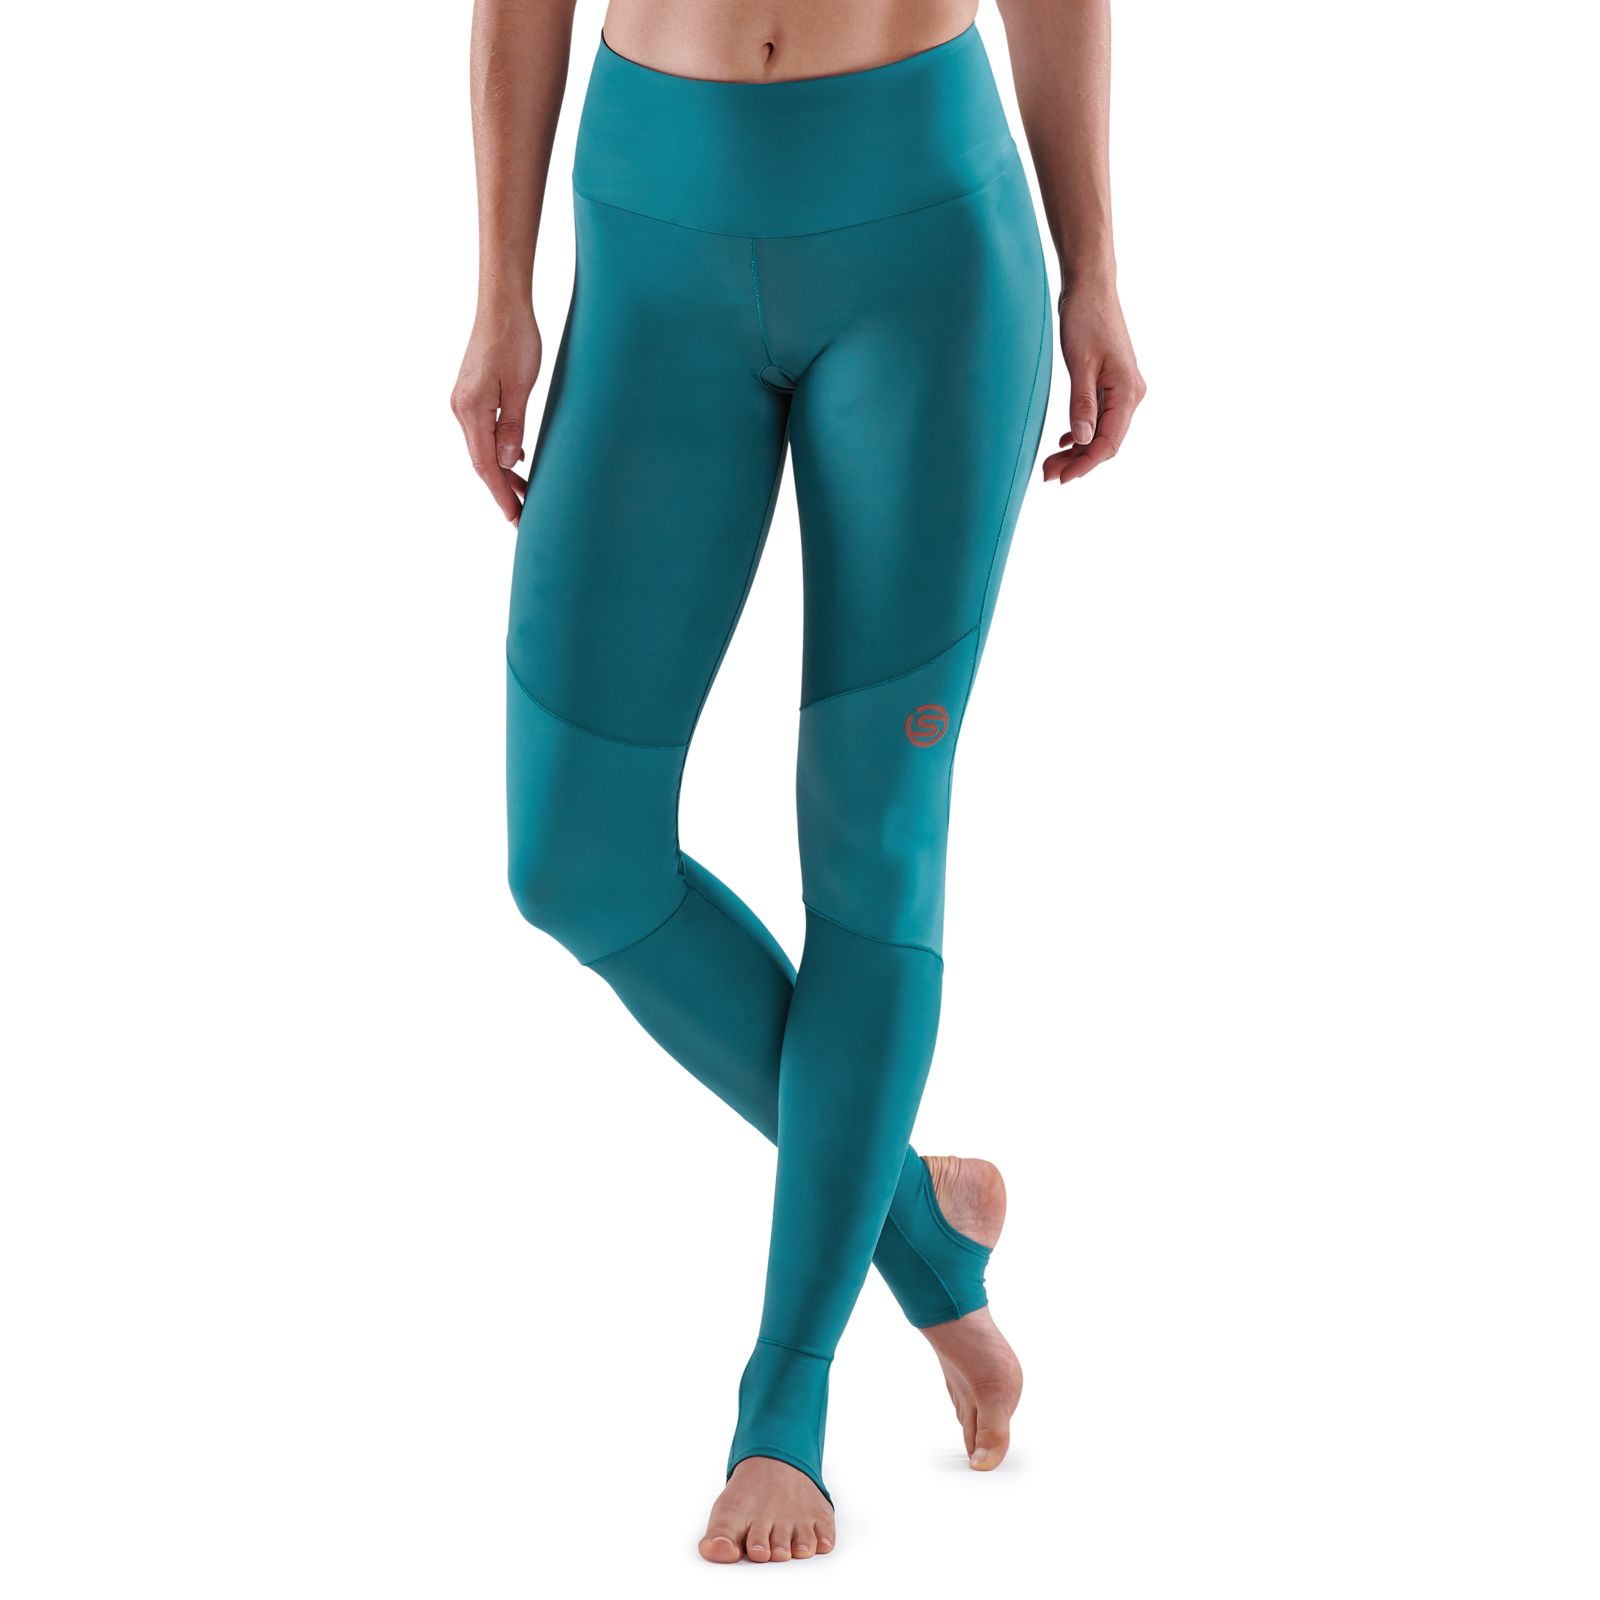 SKINS SERIES-5 WOMEN'S TRAVEL AND RECOVERY LONG TIGHTS TEAL - SKINS  Compression EU